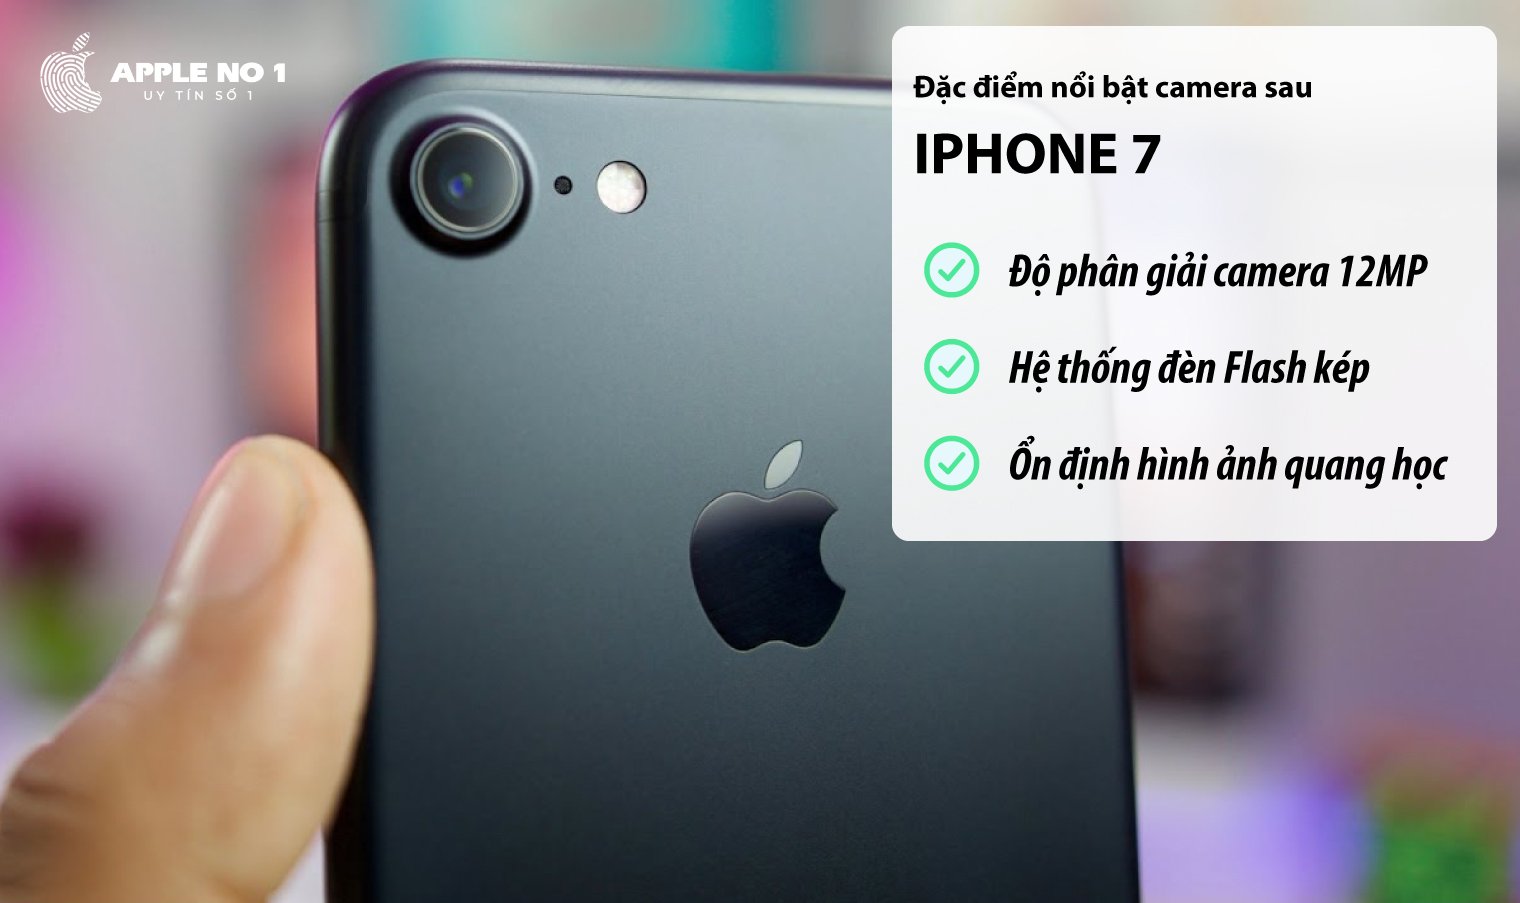 dien thoai iphone 7 voi camera sau 12 MP on dinh hinh anh quang hoc tu dong